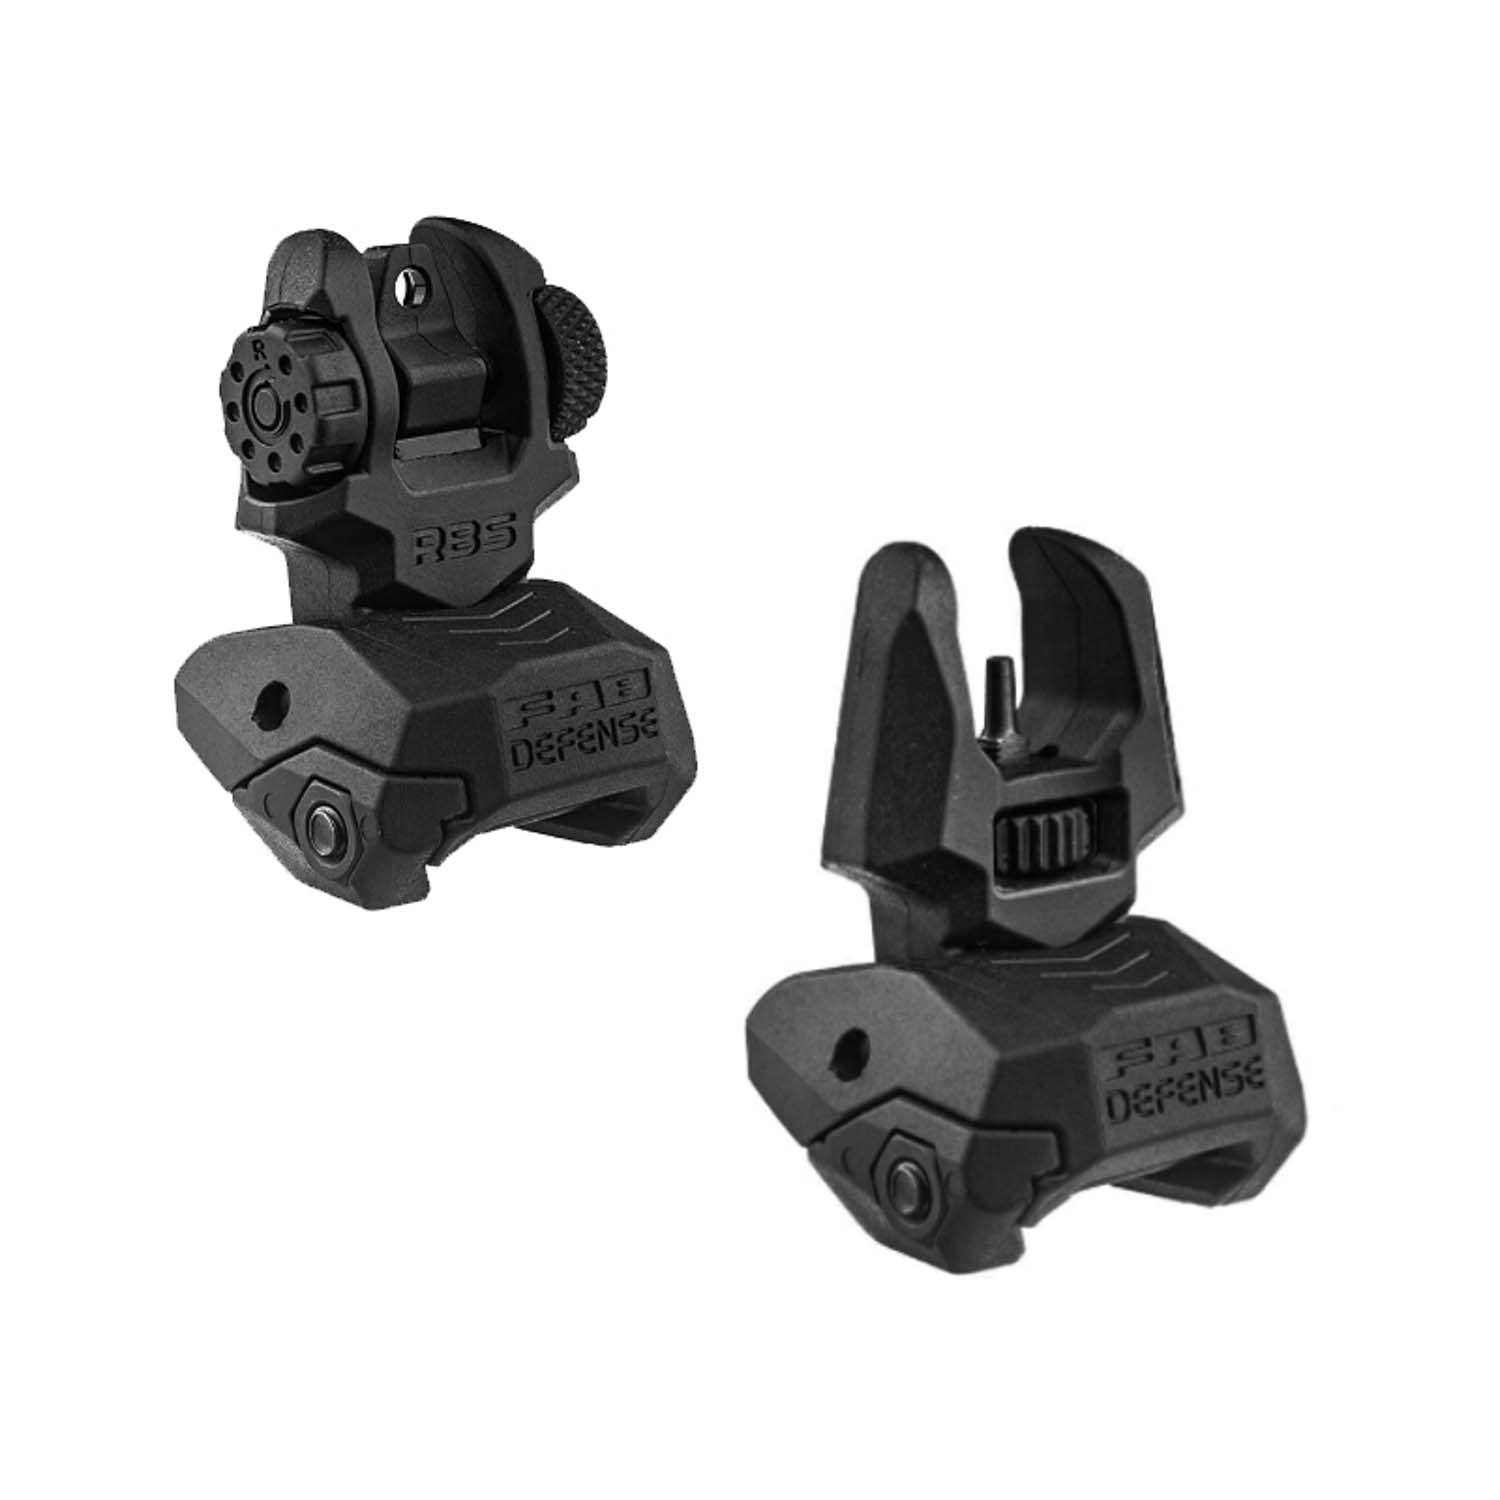 RBS FBS FAB Defense Front & Rear Polymer Back-Up Picatinny Sight Set 